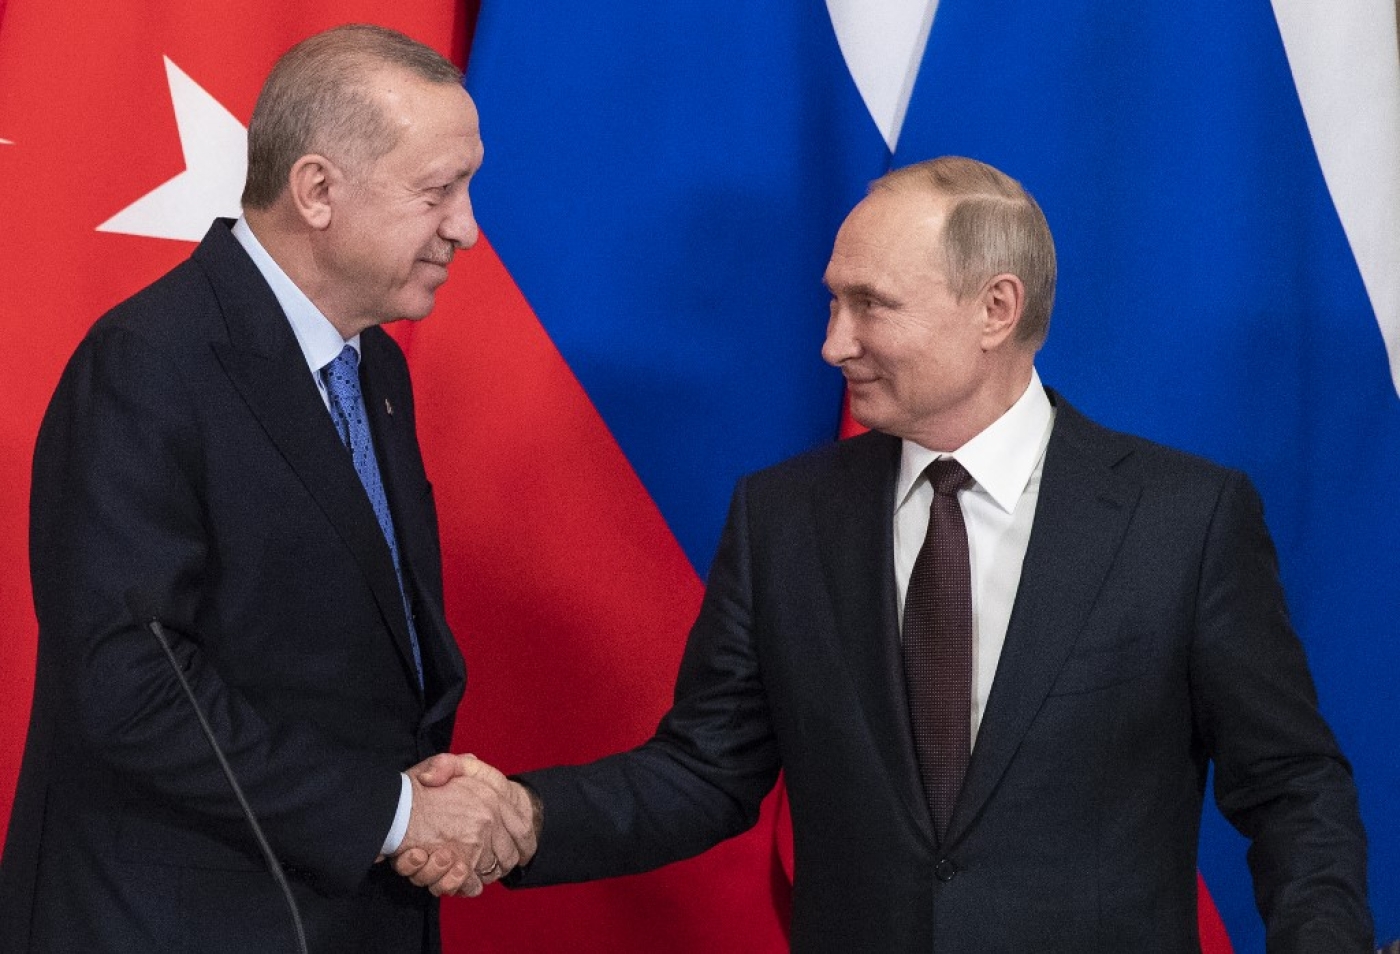 Turkish President Recep Tayyip Erdogan and Russian President Vladimir Putin shake hands in Moscow in March 2020 (AFP)